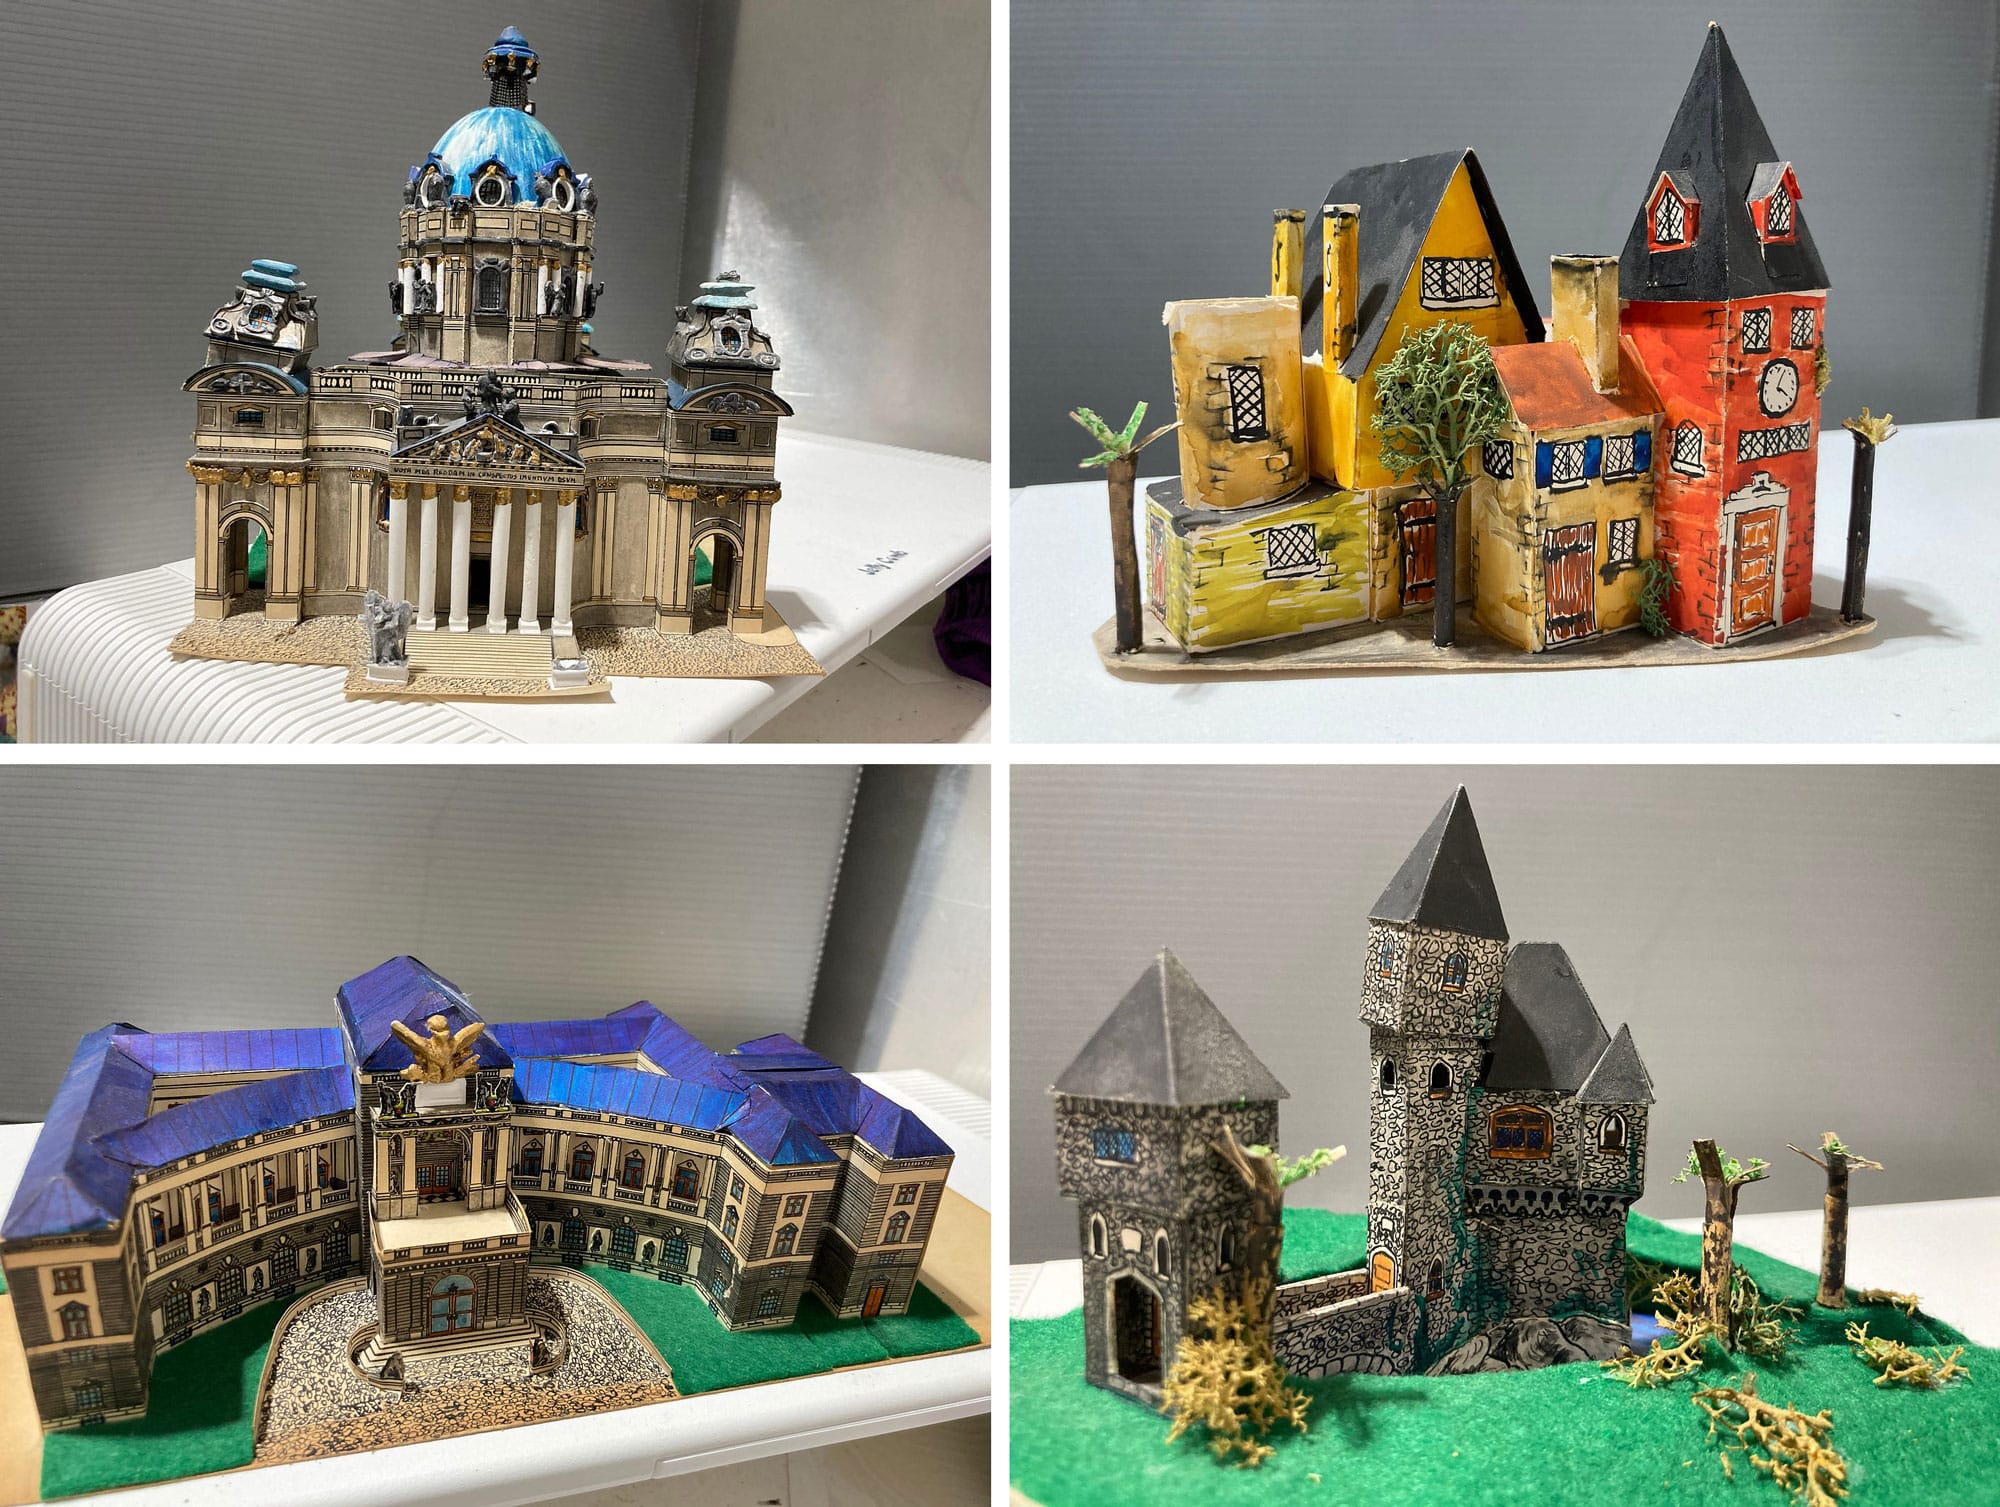 Cardboard and plaster buildings made by John's father, John B. Weiss